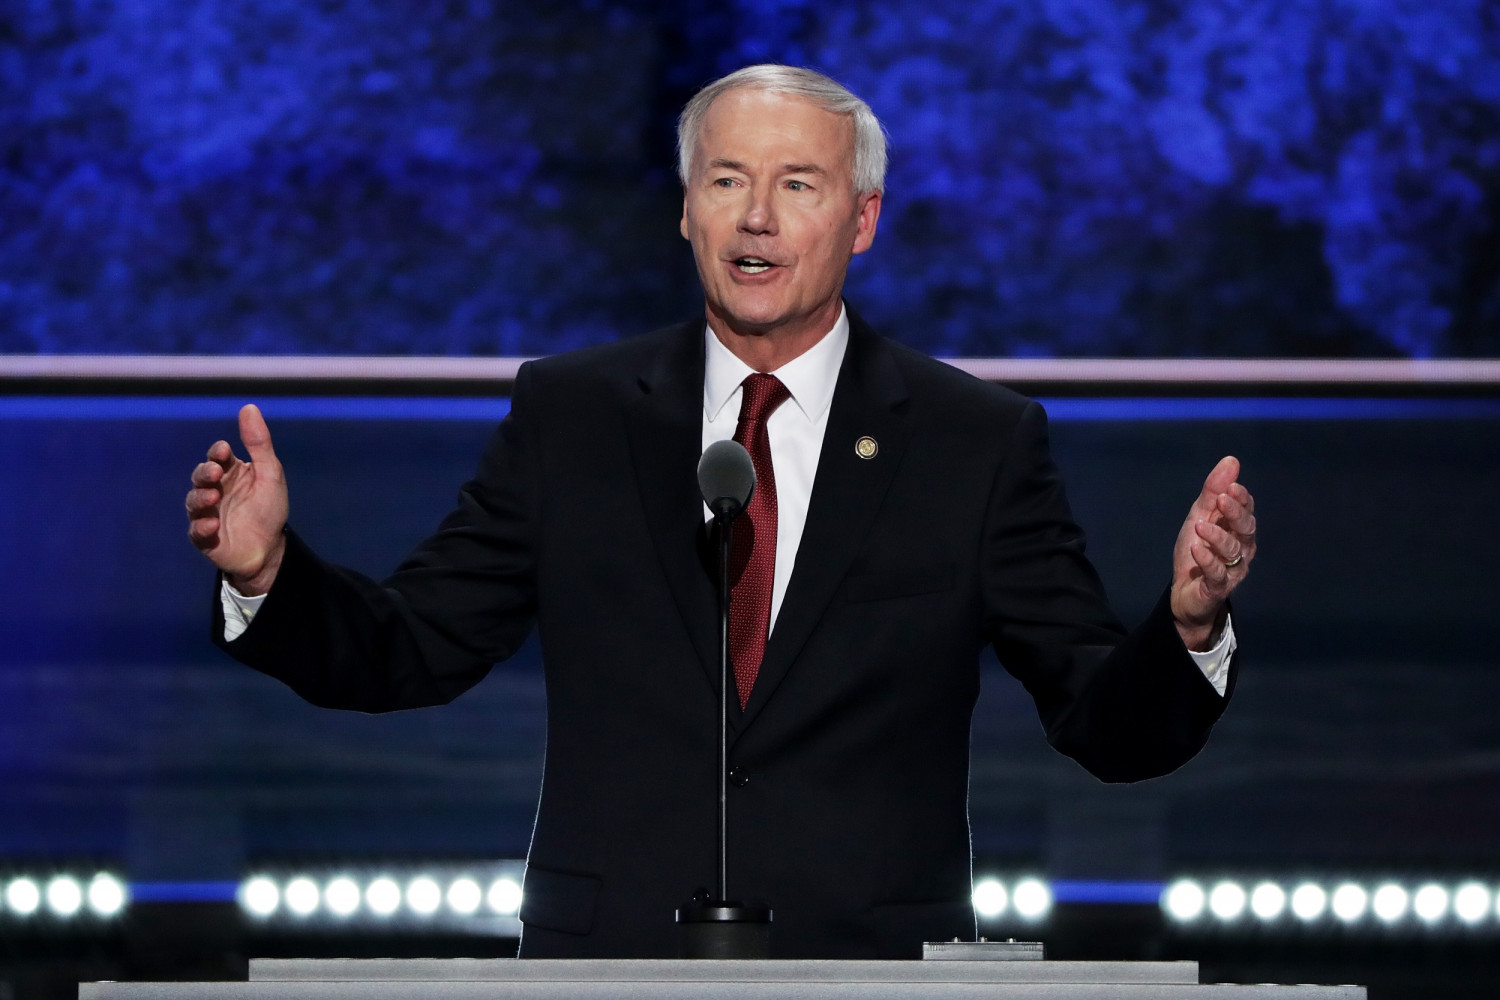 Arkansas Governor Says State’s Near-Total Abortion Ban Designed to Challenge Roe v. Wade